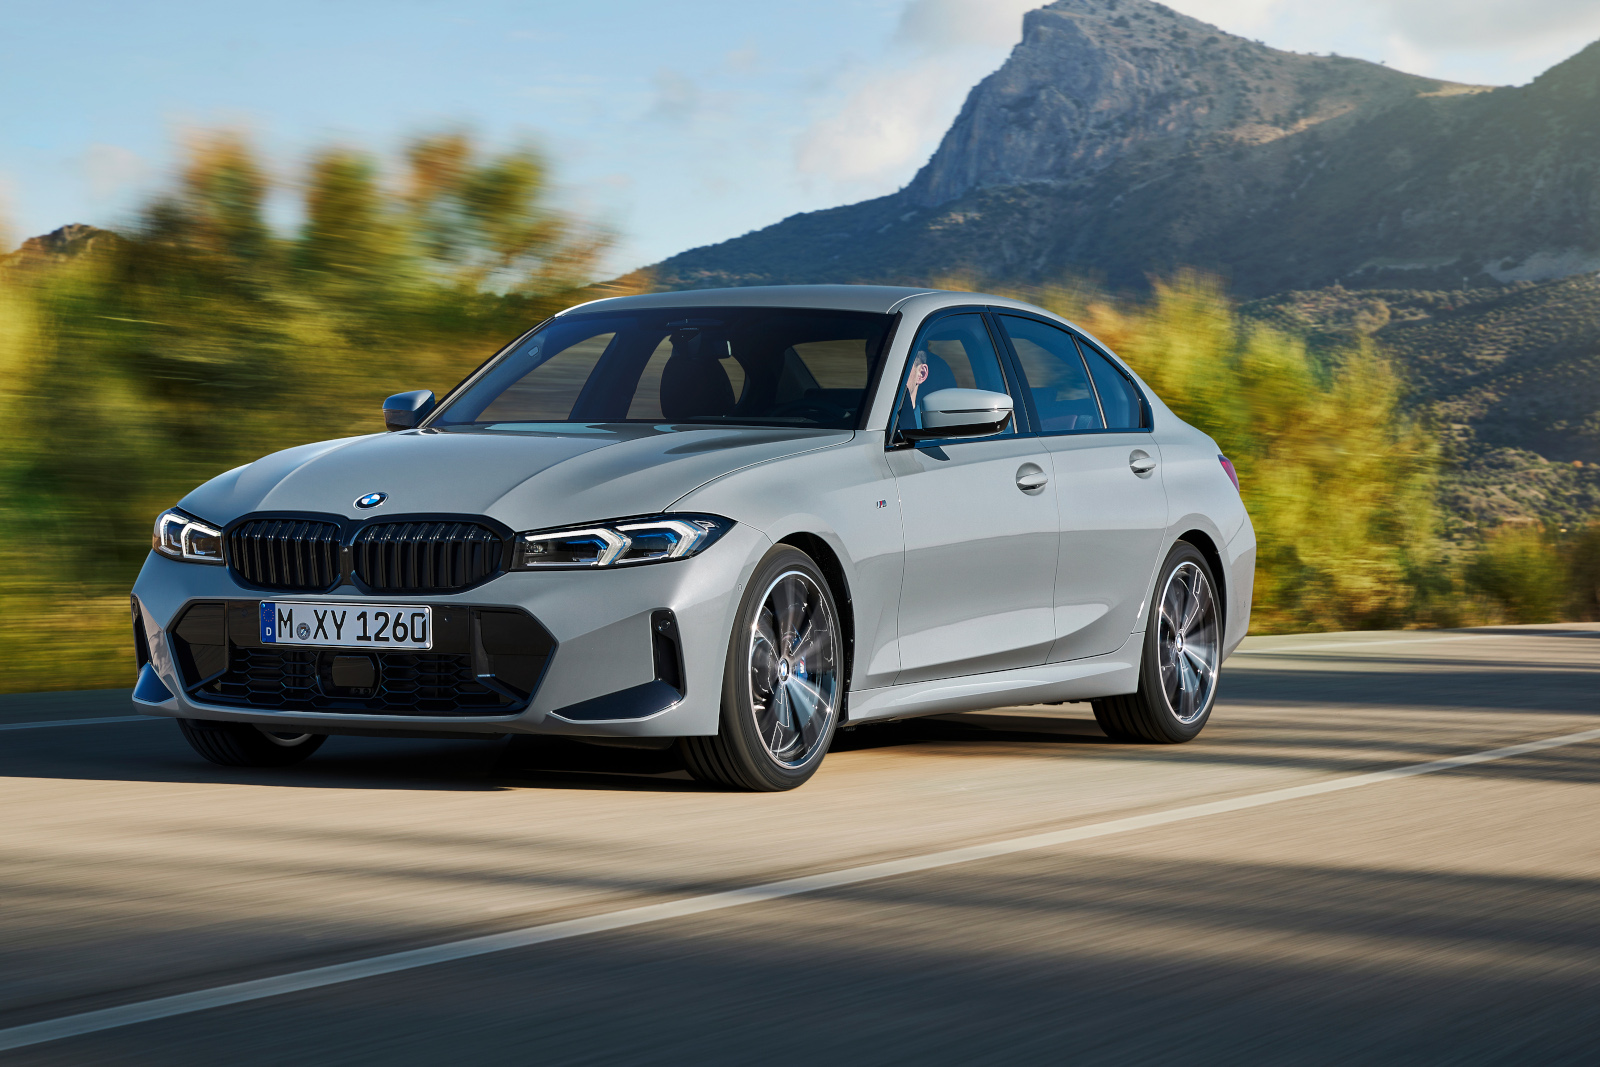 The 2023 BMW 3 Series shows renewed elegance and a new interior

